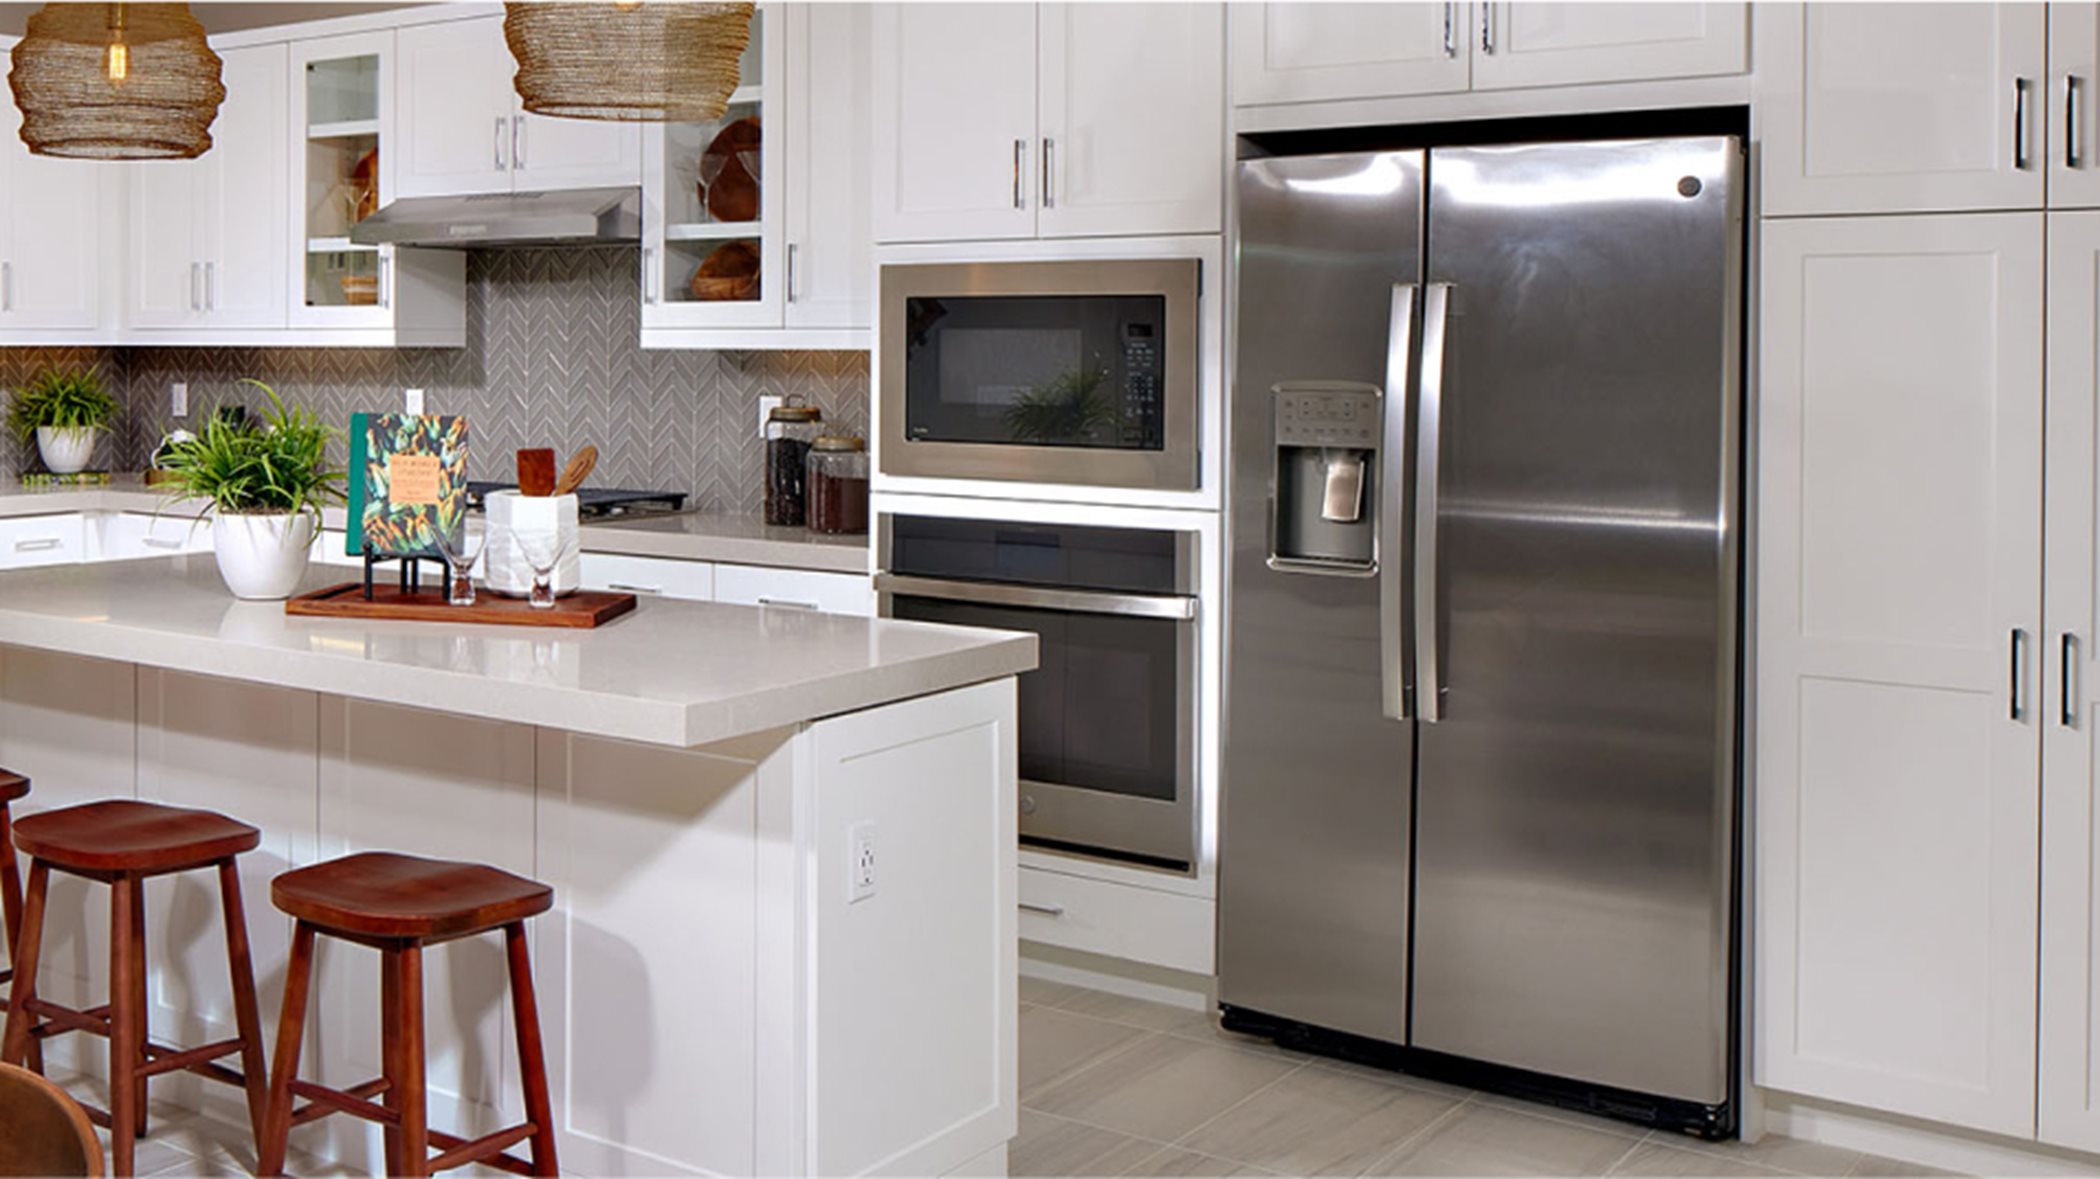 Brand-new stainless steel appliances will inspire attempts at new recipes 